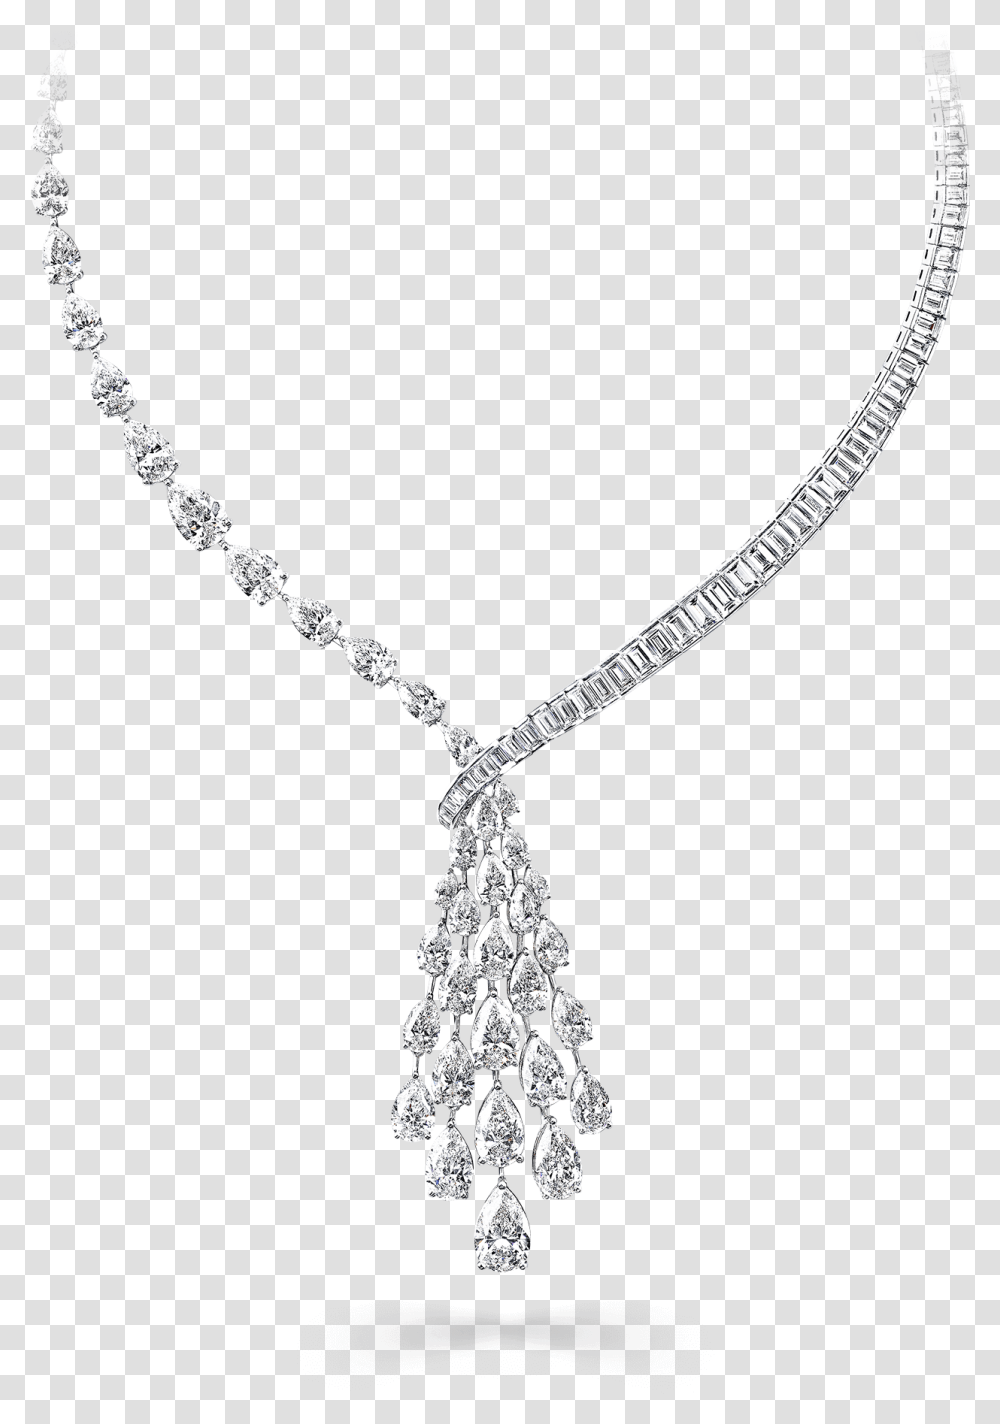 Diamond Download Pendant, Necklace, Jewelry, Accessories, Accessory Transparent Png